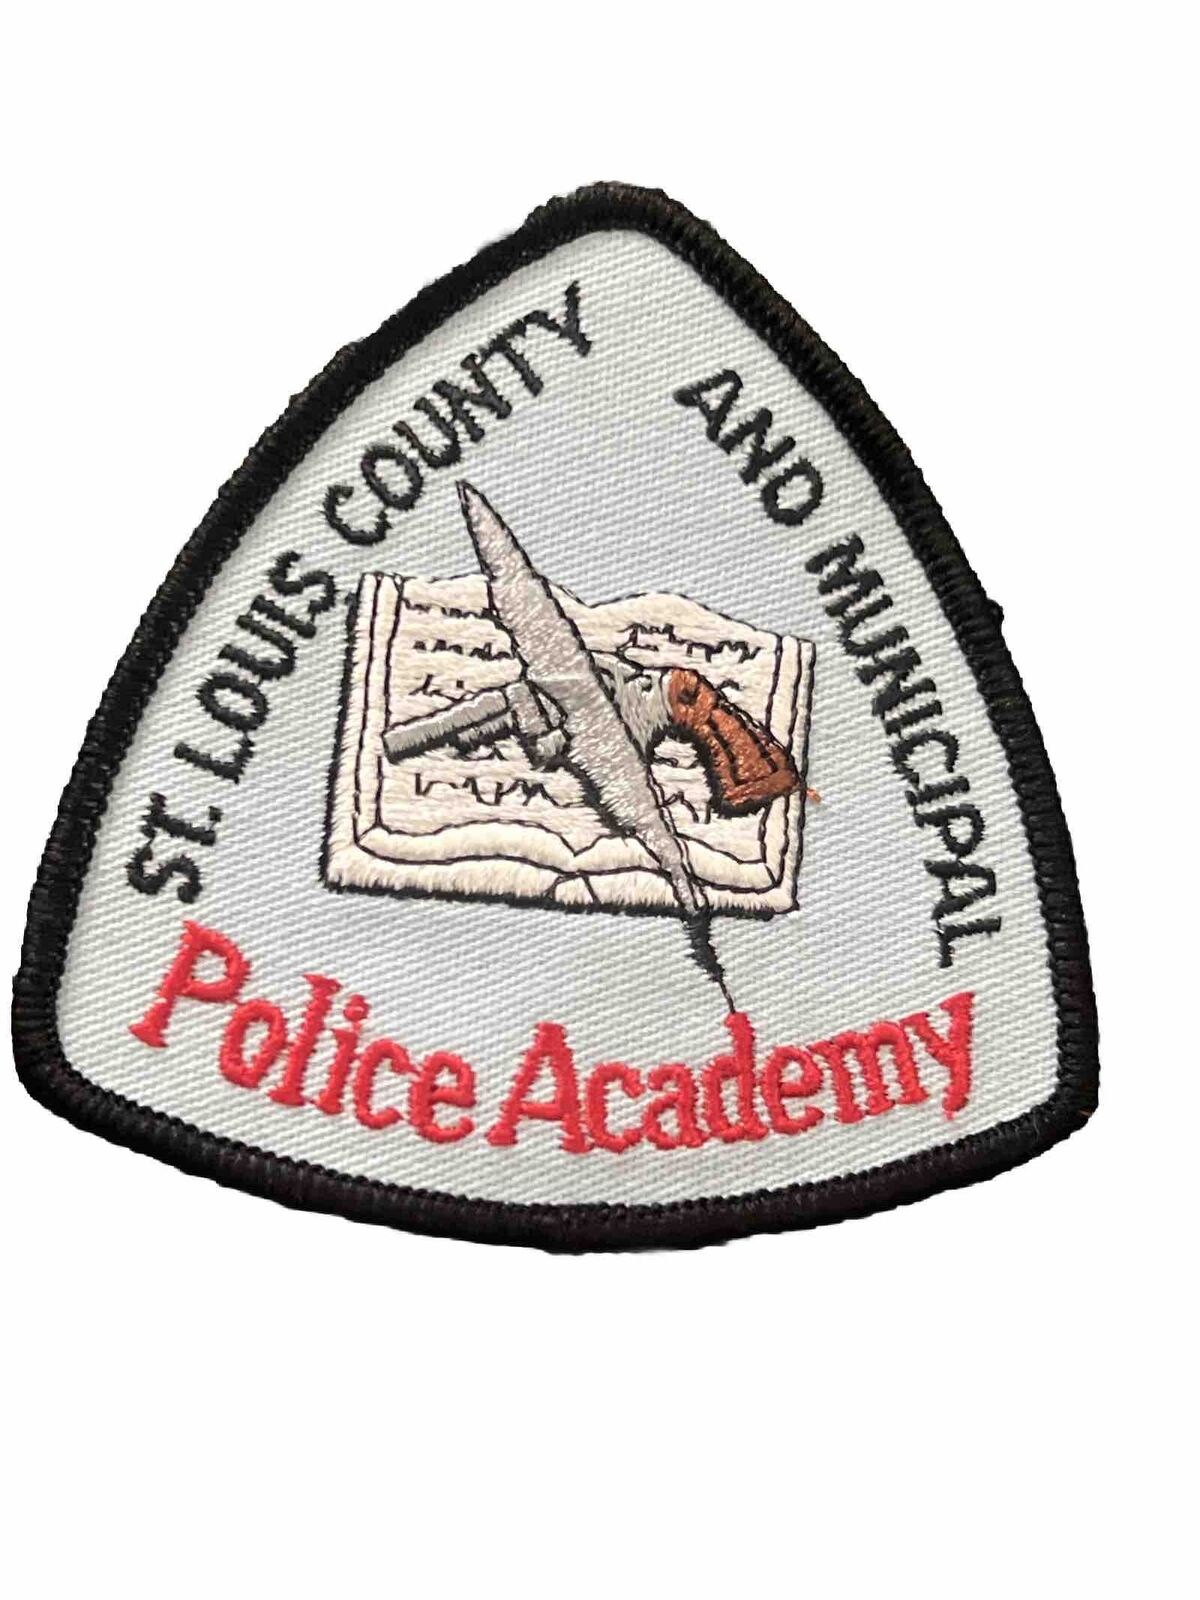 Vintage St Louis County and Municipal Police Academy Should Patch. 1980s